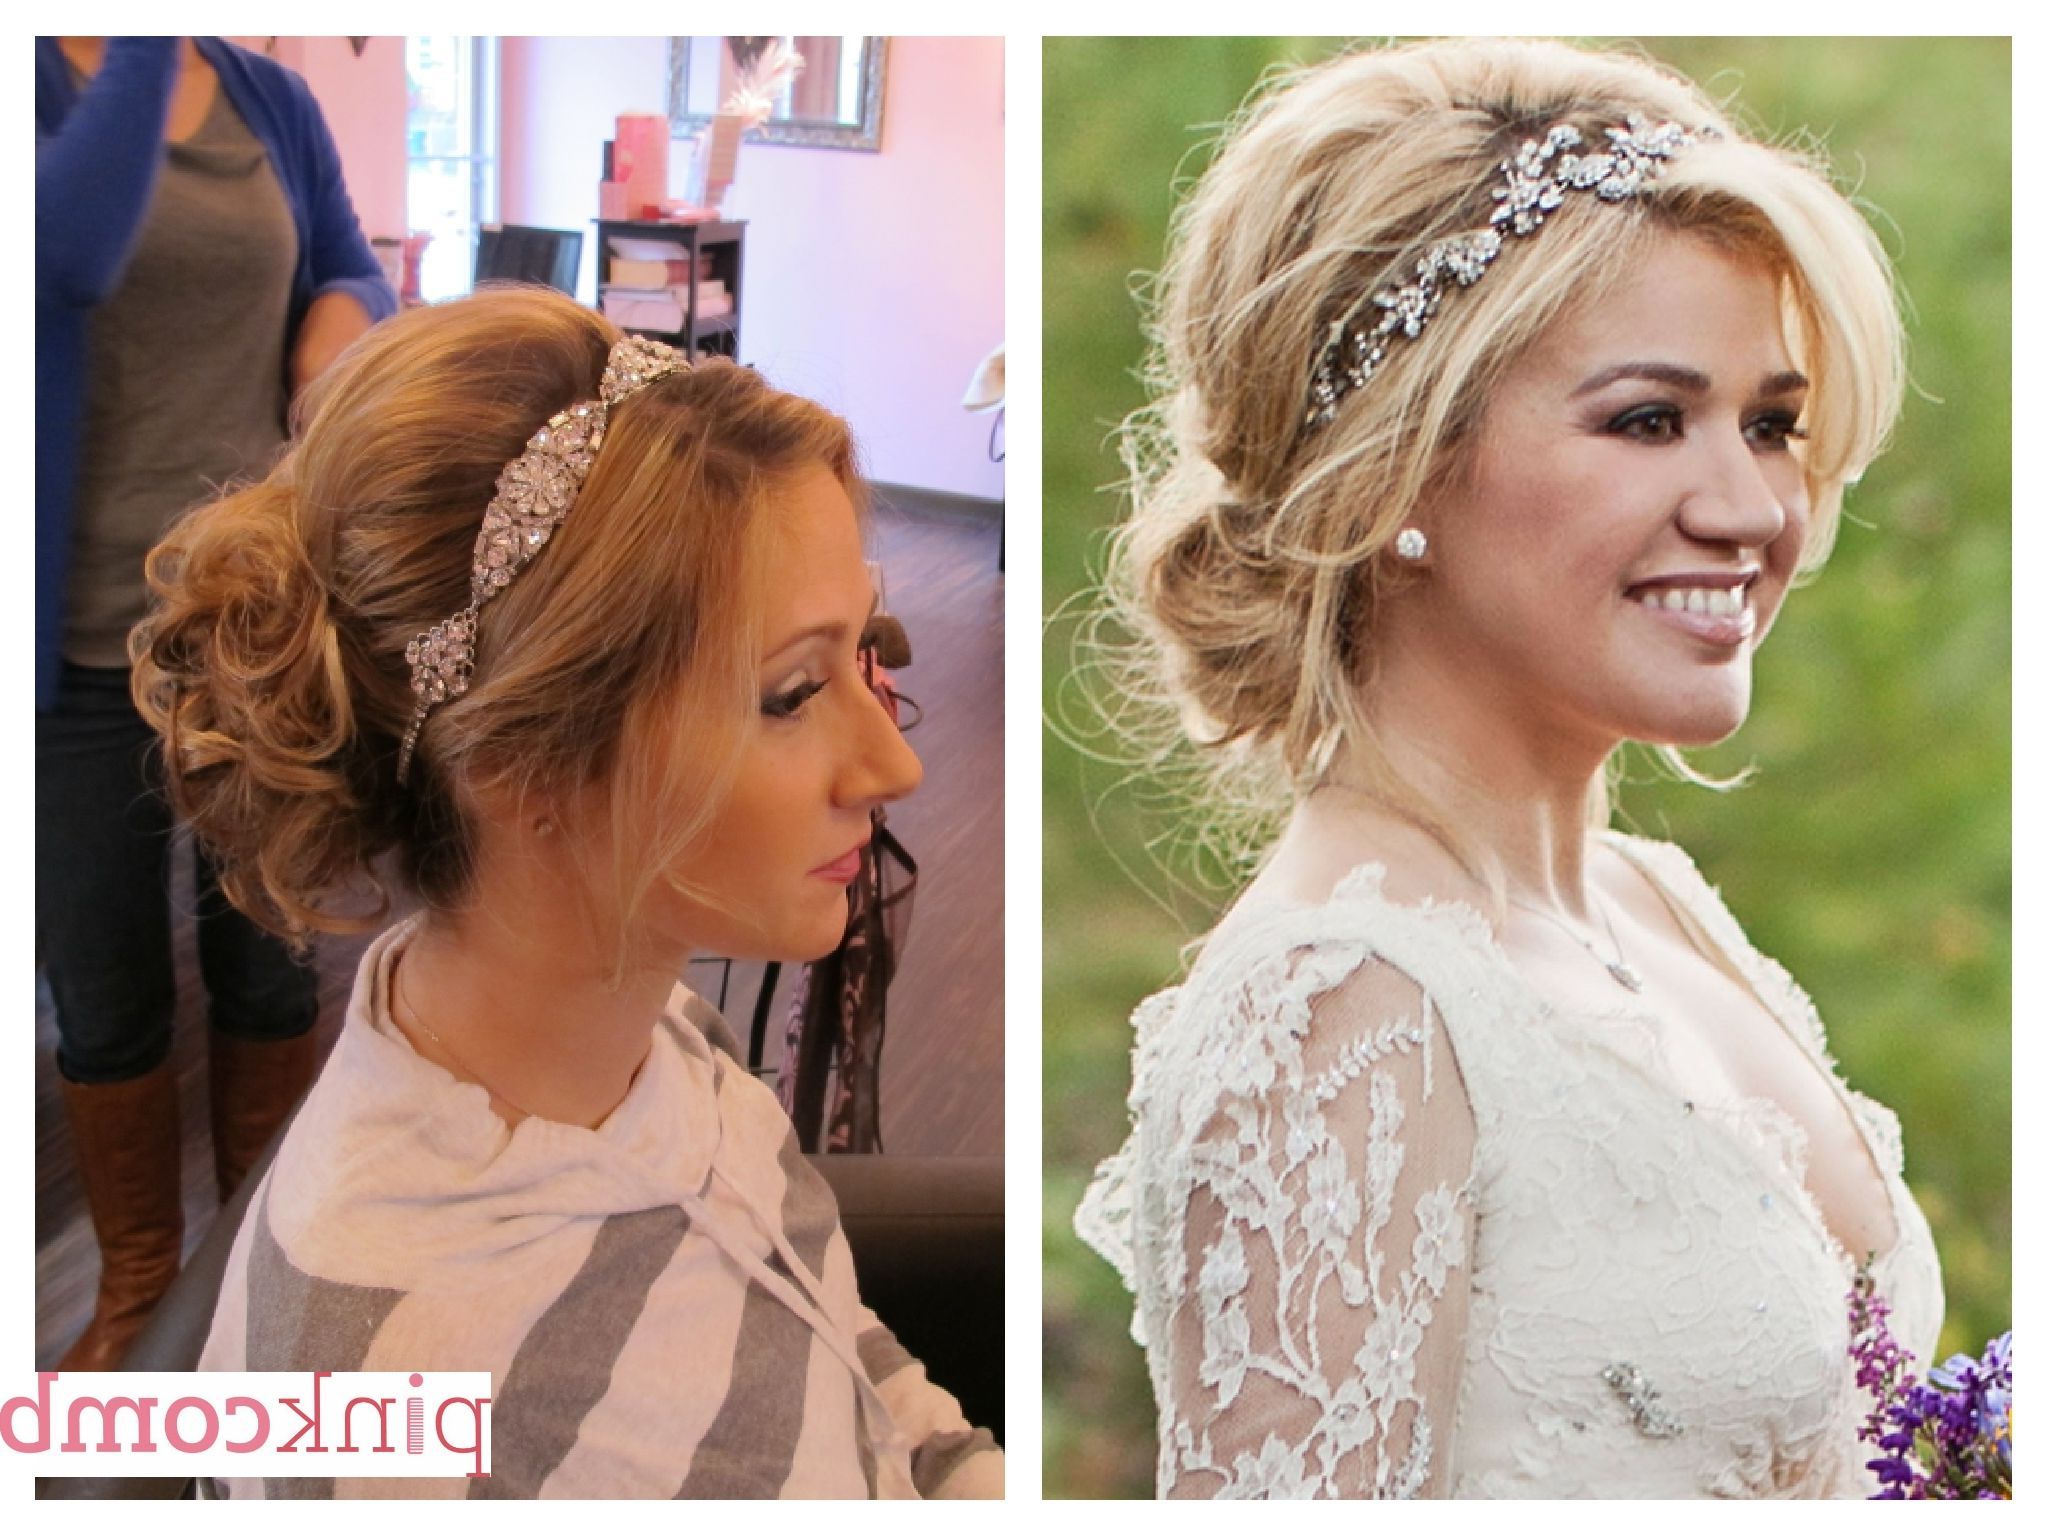 Kelly Clarkson Inspired Loose Blonde Updo With Curls Ad Headband Inside Most Recent Neat Bridal Hairdos With Headband (View 20 of 20)